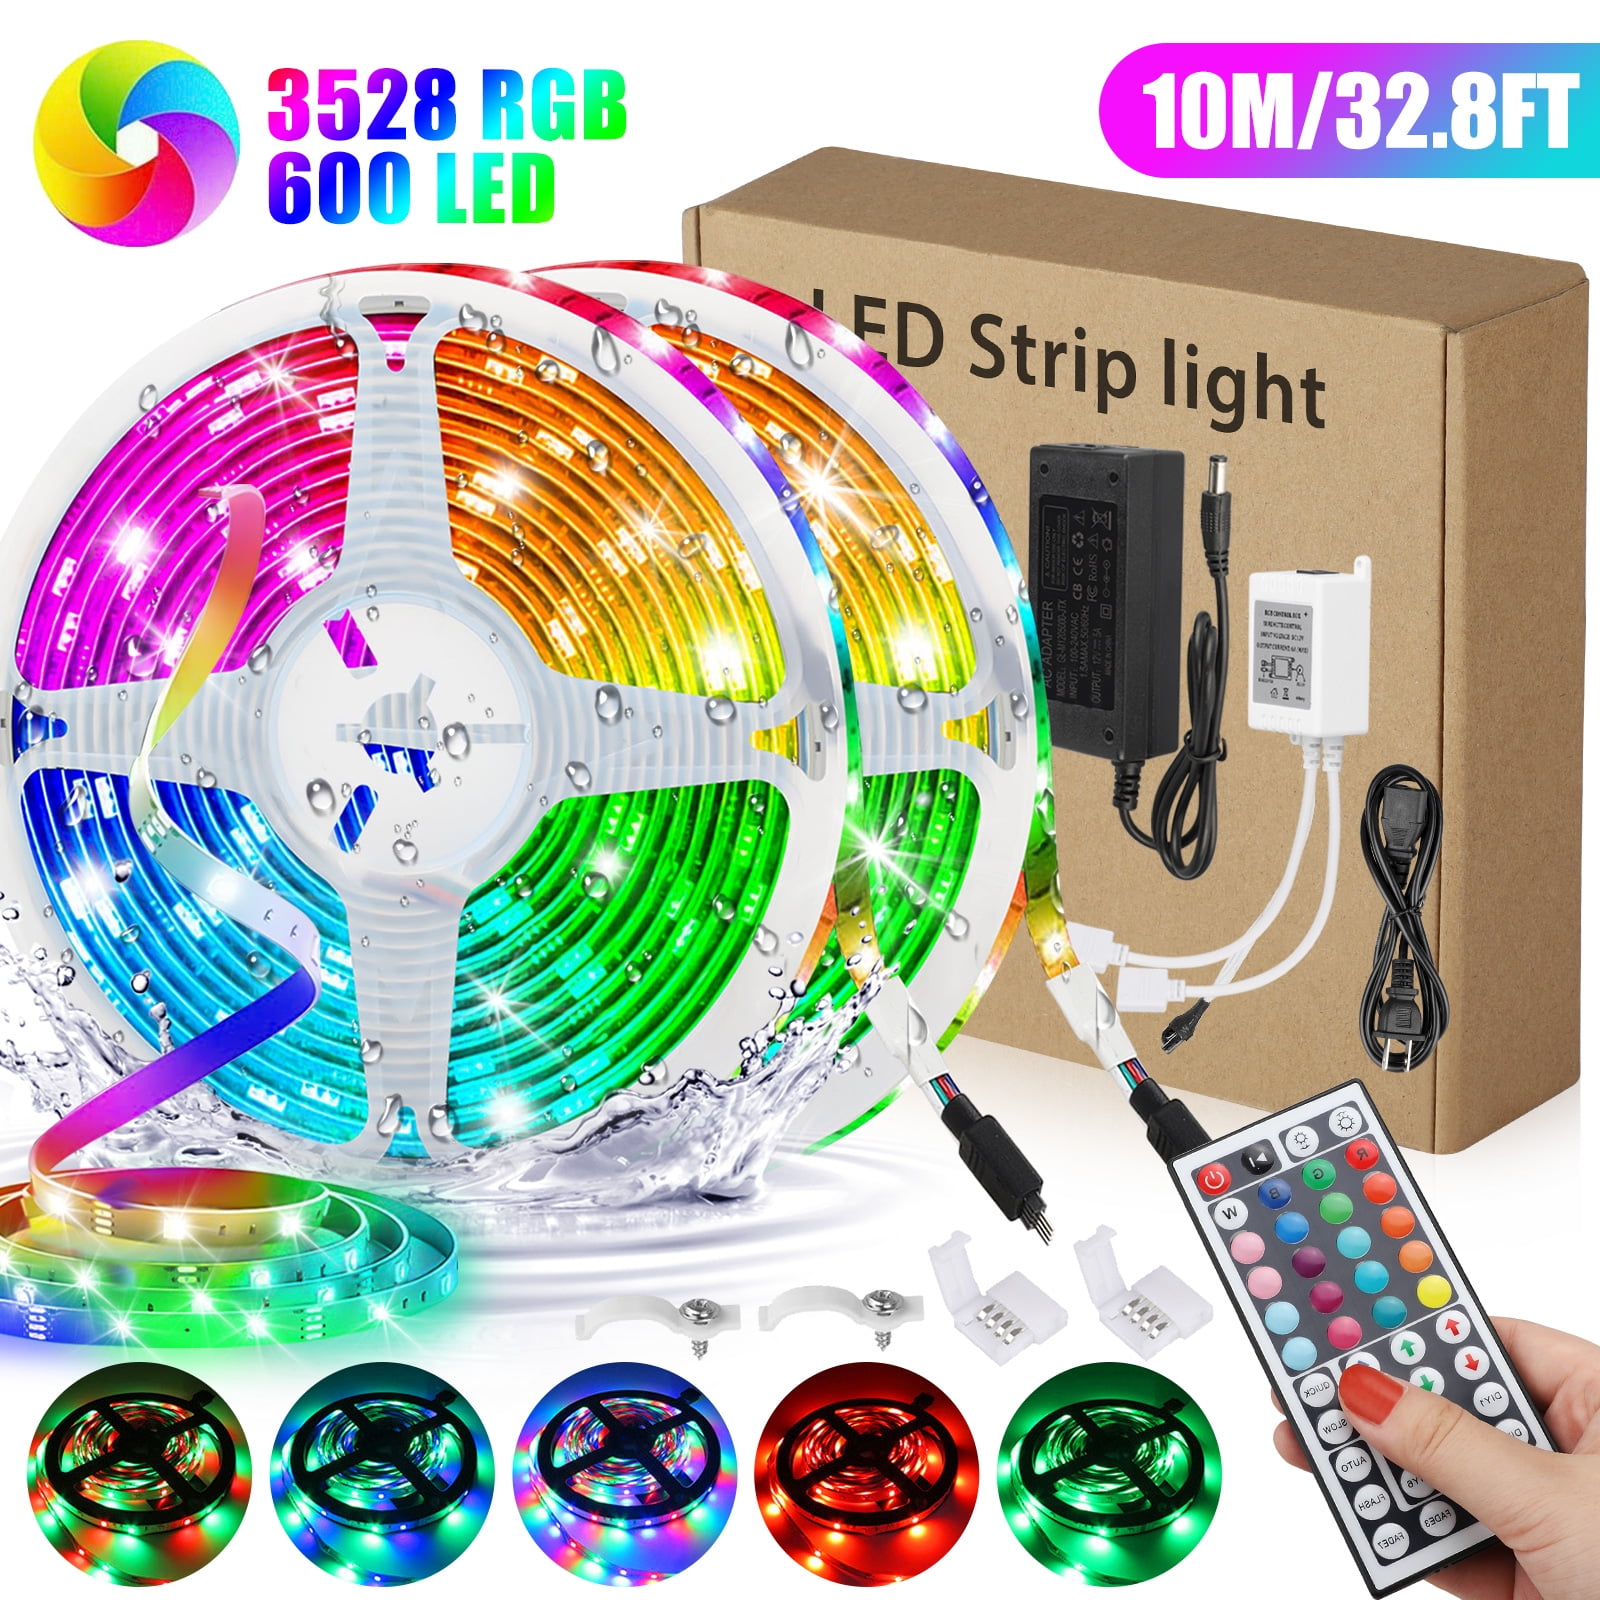 Details about  / Warm White LED Strip Lights Bright 300 LEDs 3000K Dimmable Strip Lights with Co